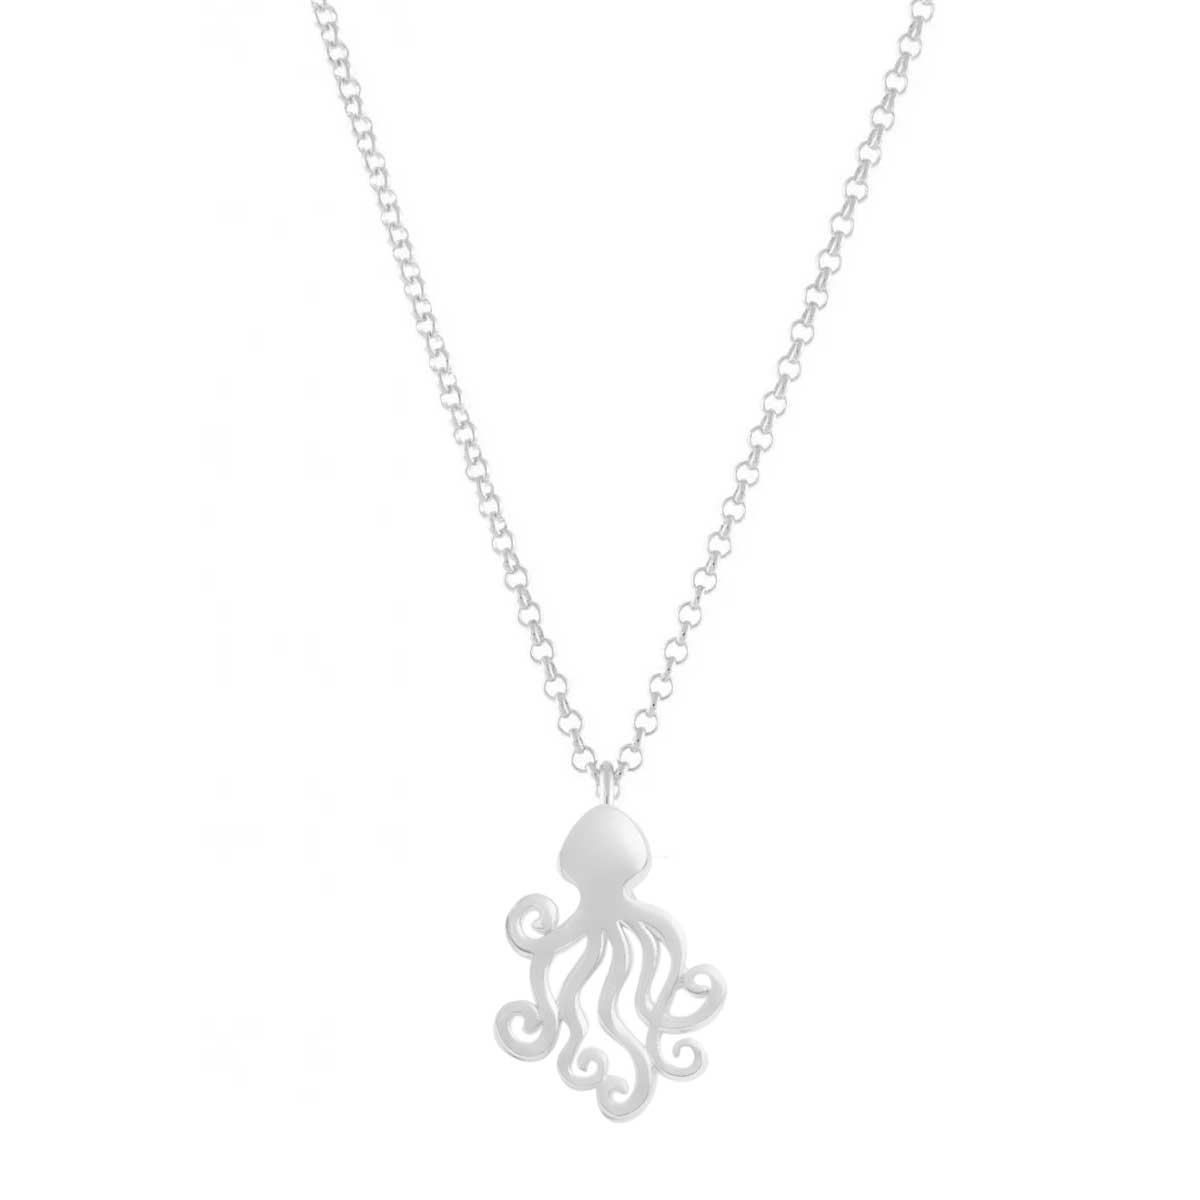 Octopi Necklace